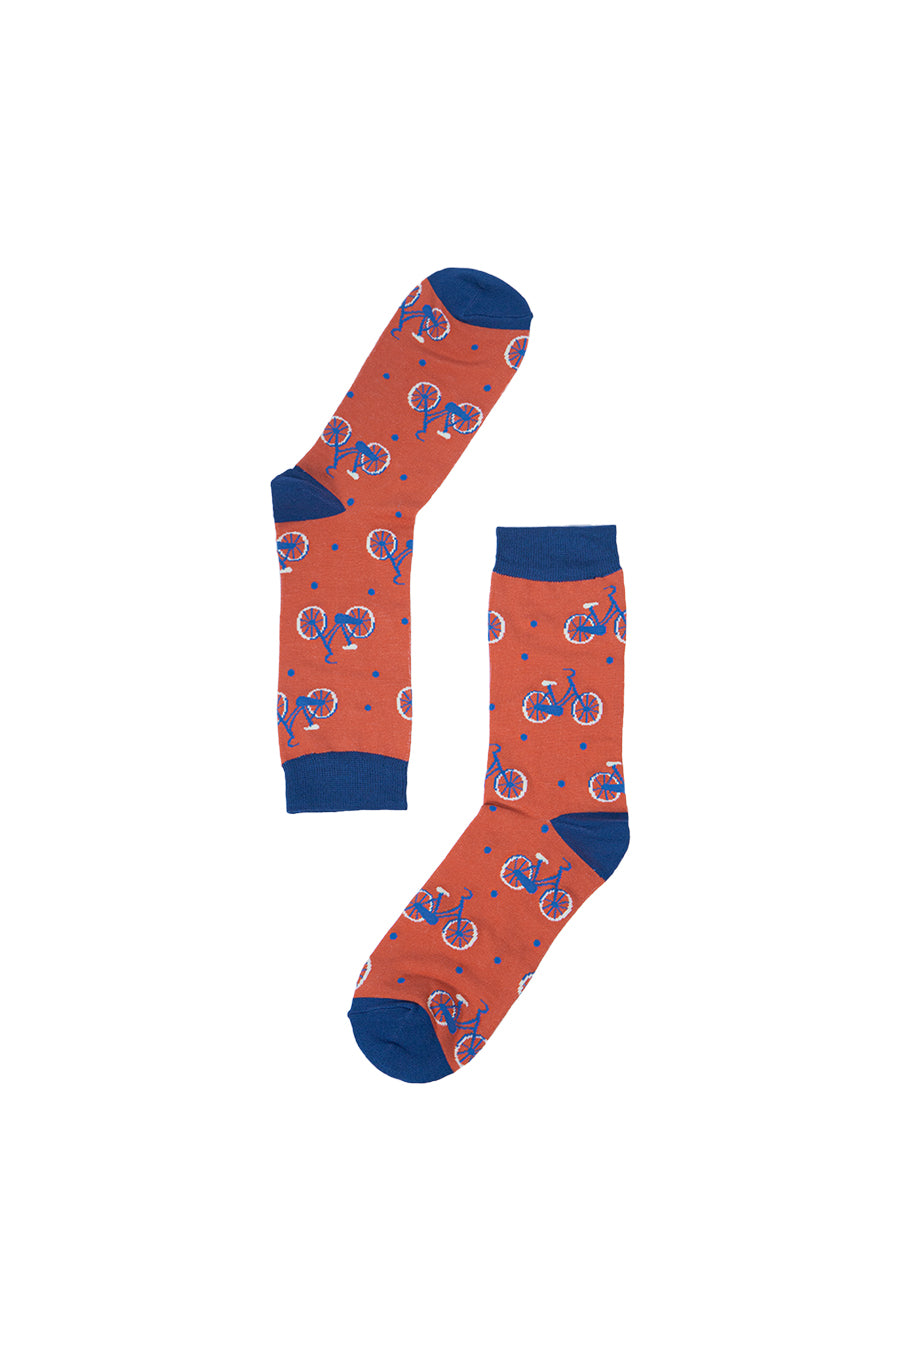 orange and blue dress socks with an all over bicylce print pattern